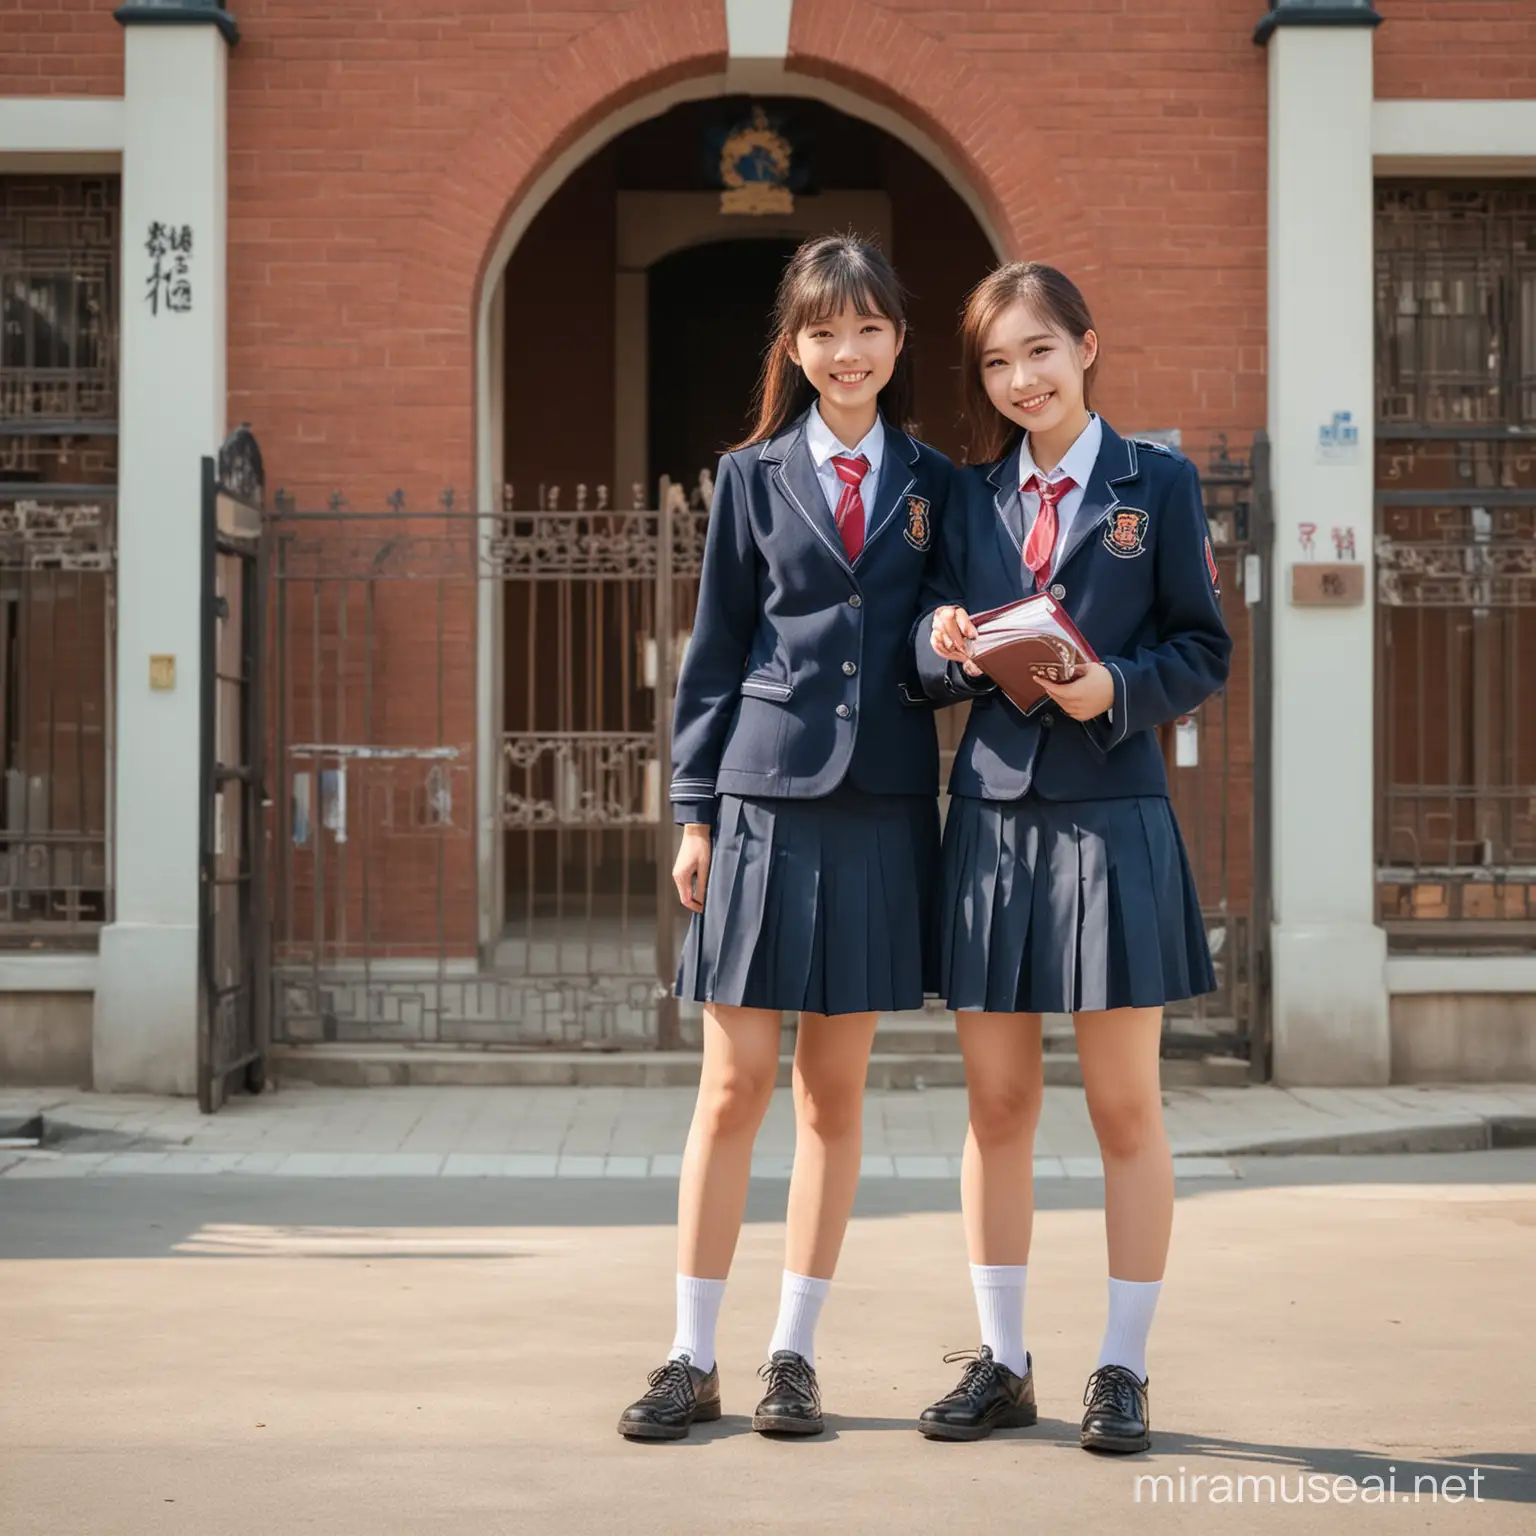 Chinese High School Couple Standing by Front Gate on Sunny Day